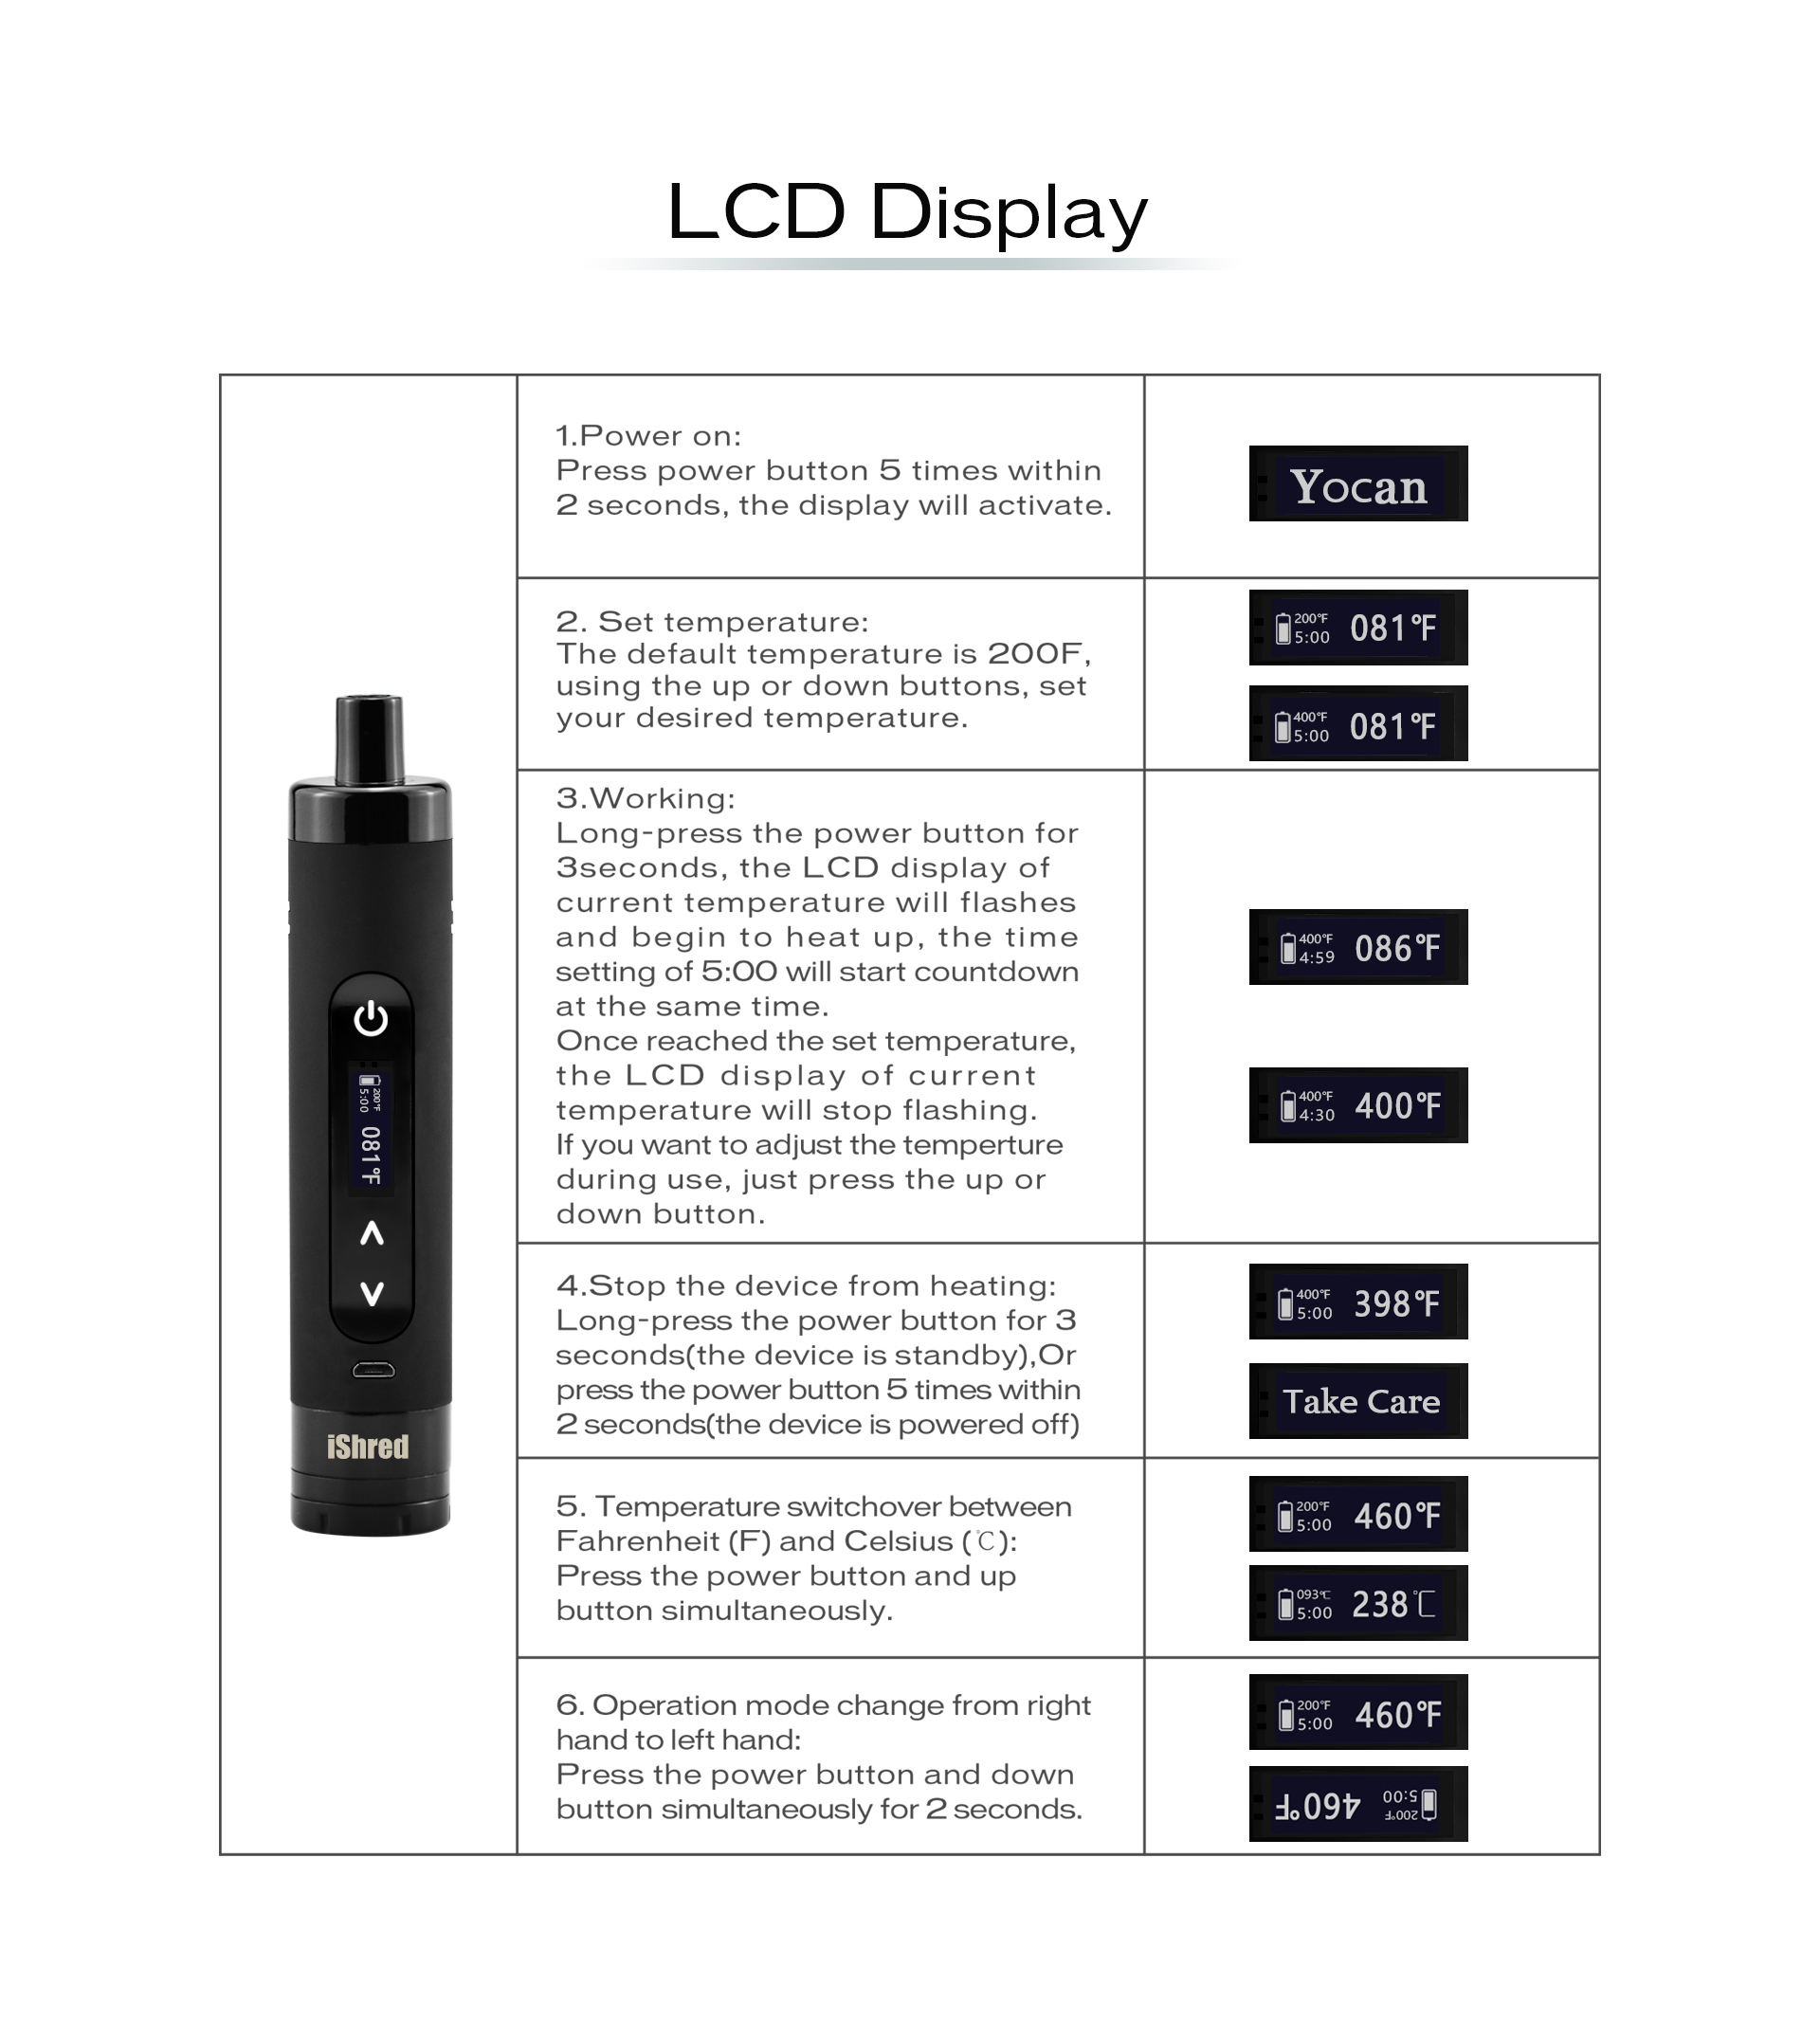 The LCD Display of Yocan iShred.